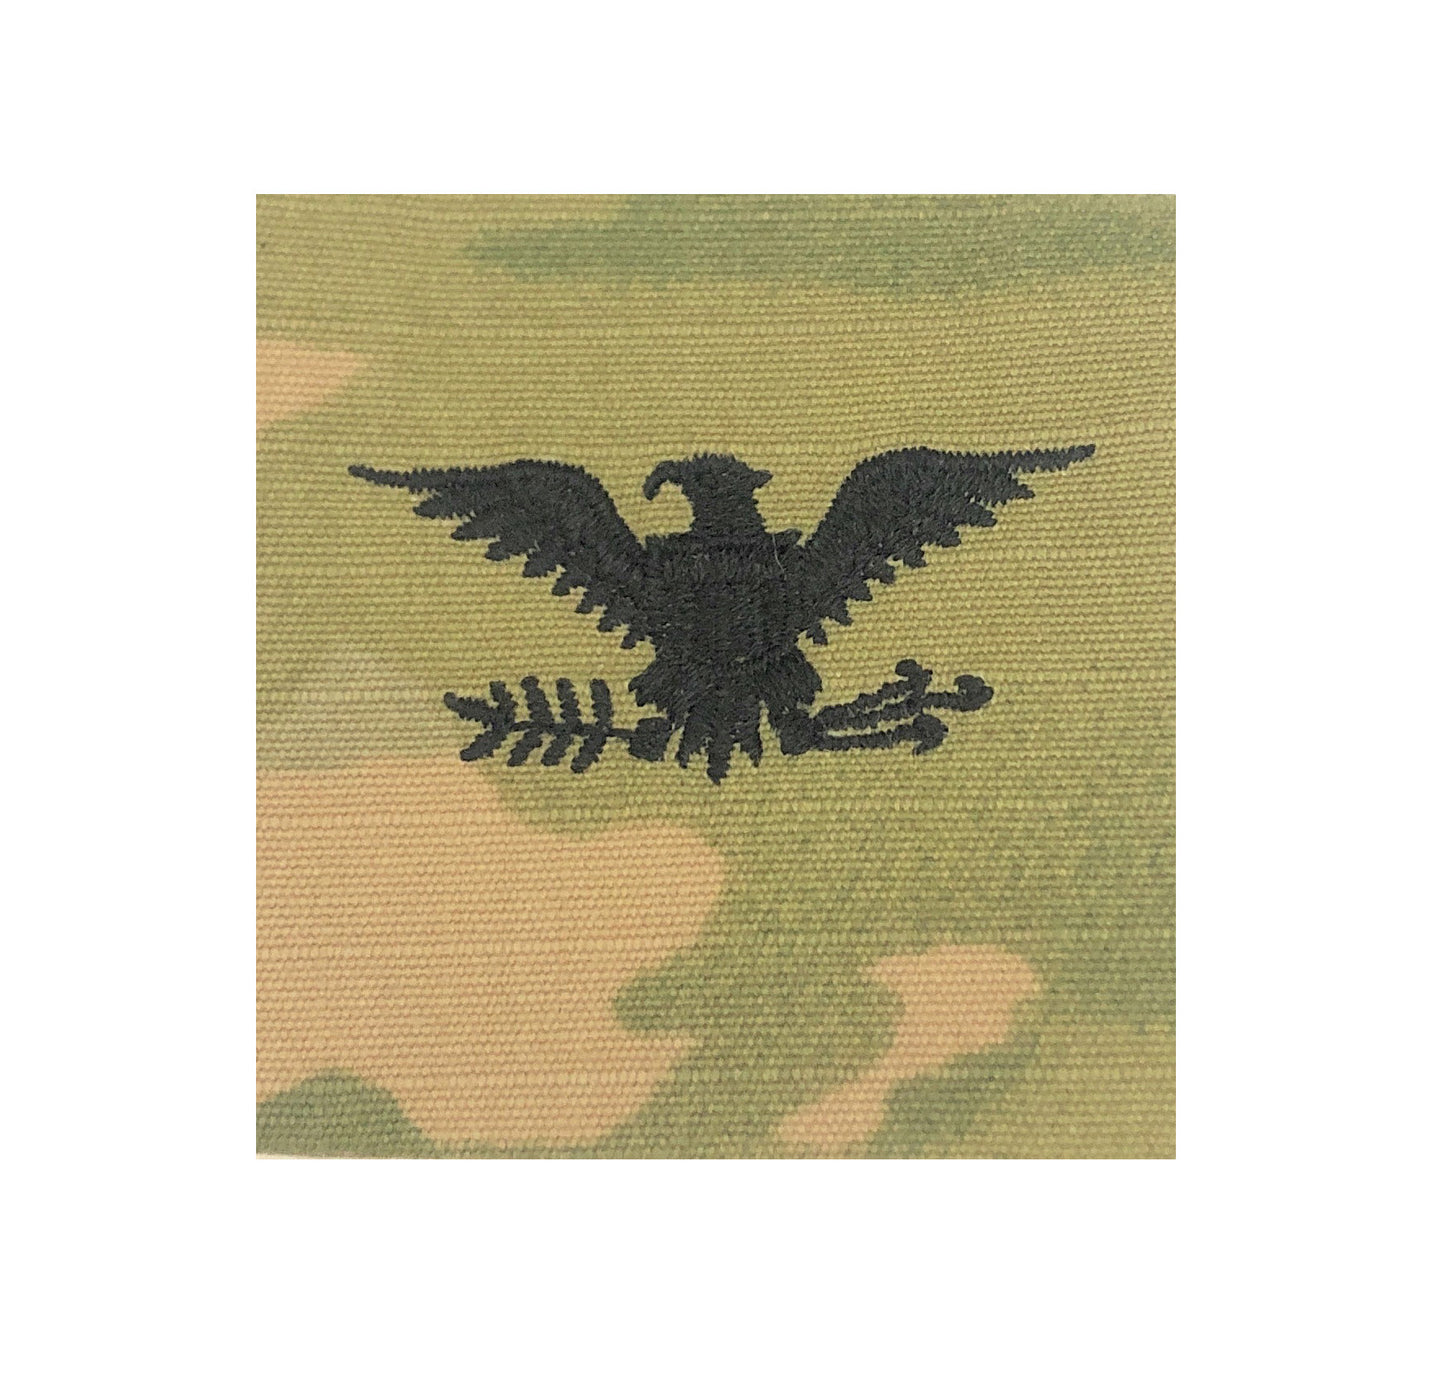 US Army O6 Colonel OCP 2x2 Sew-On Rank For Shirt,Jacket,Coat